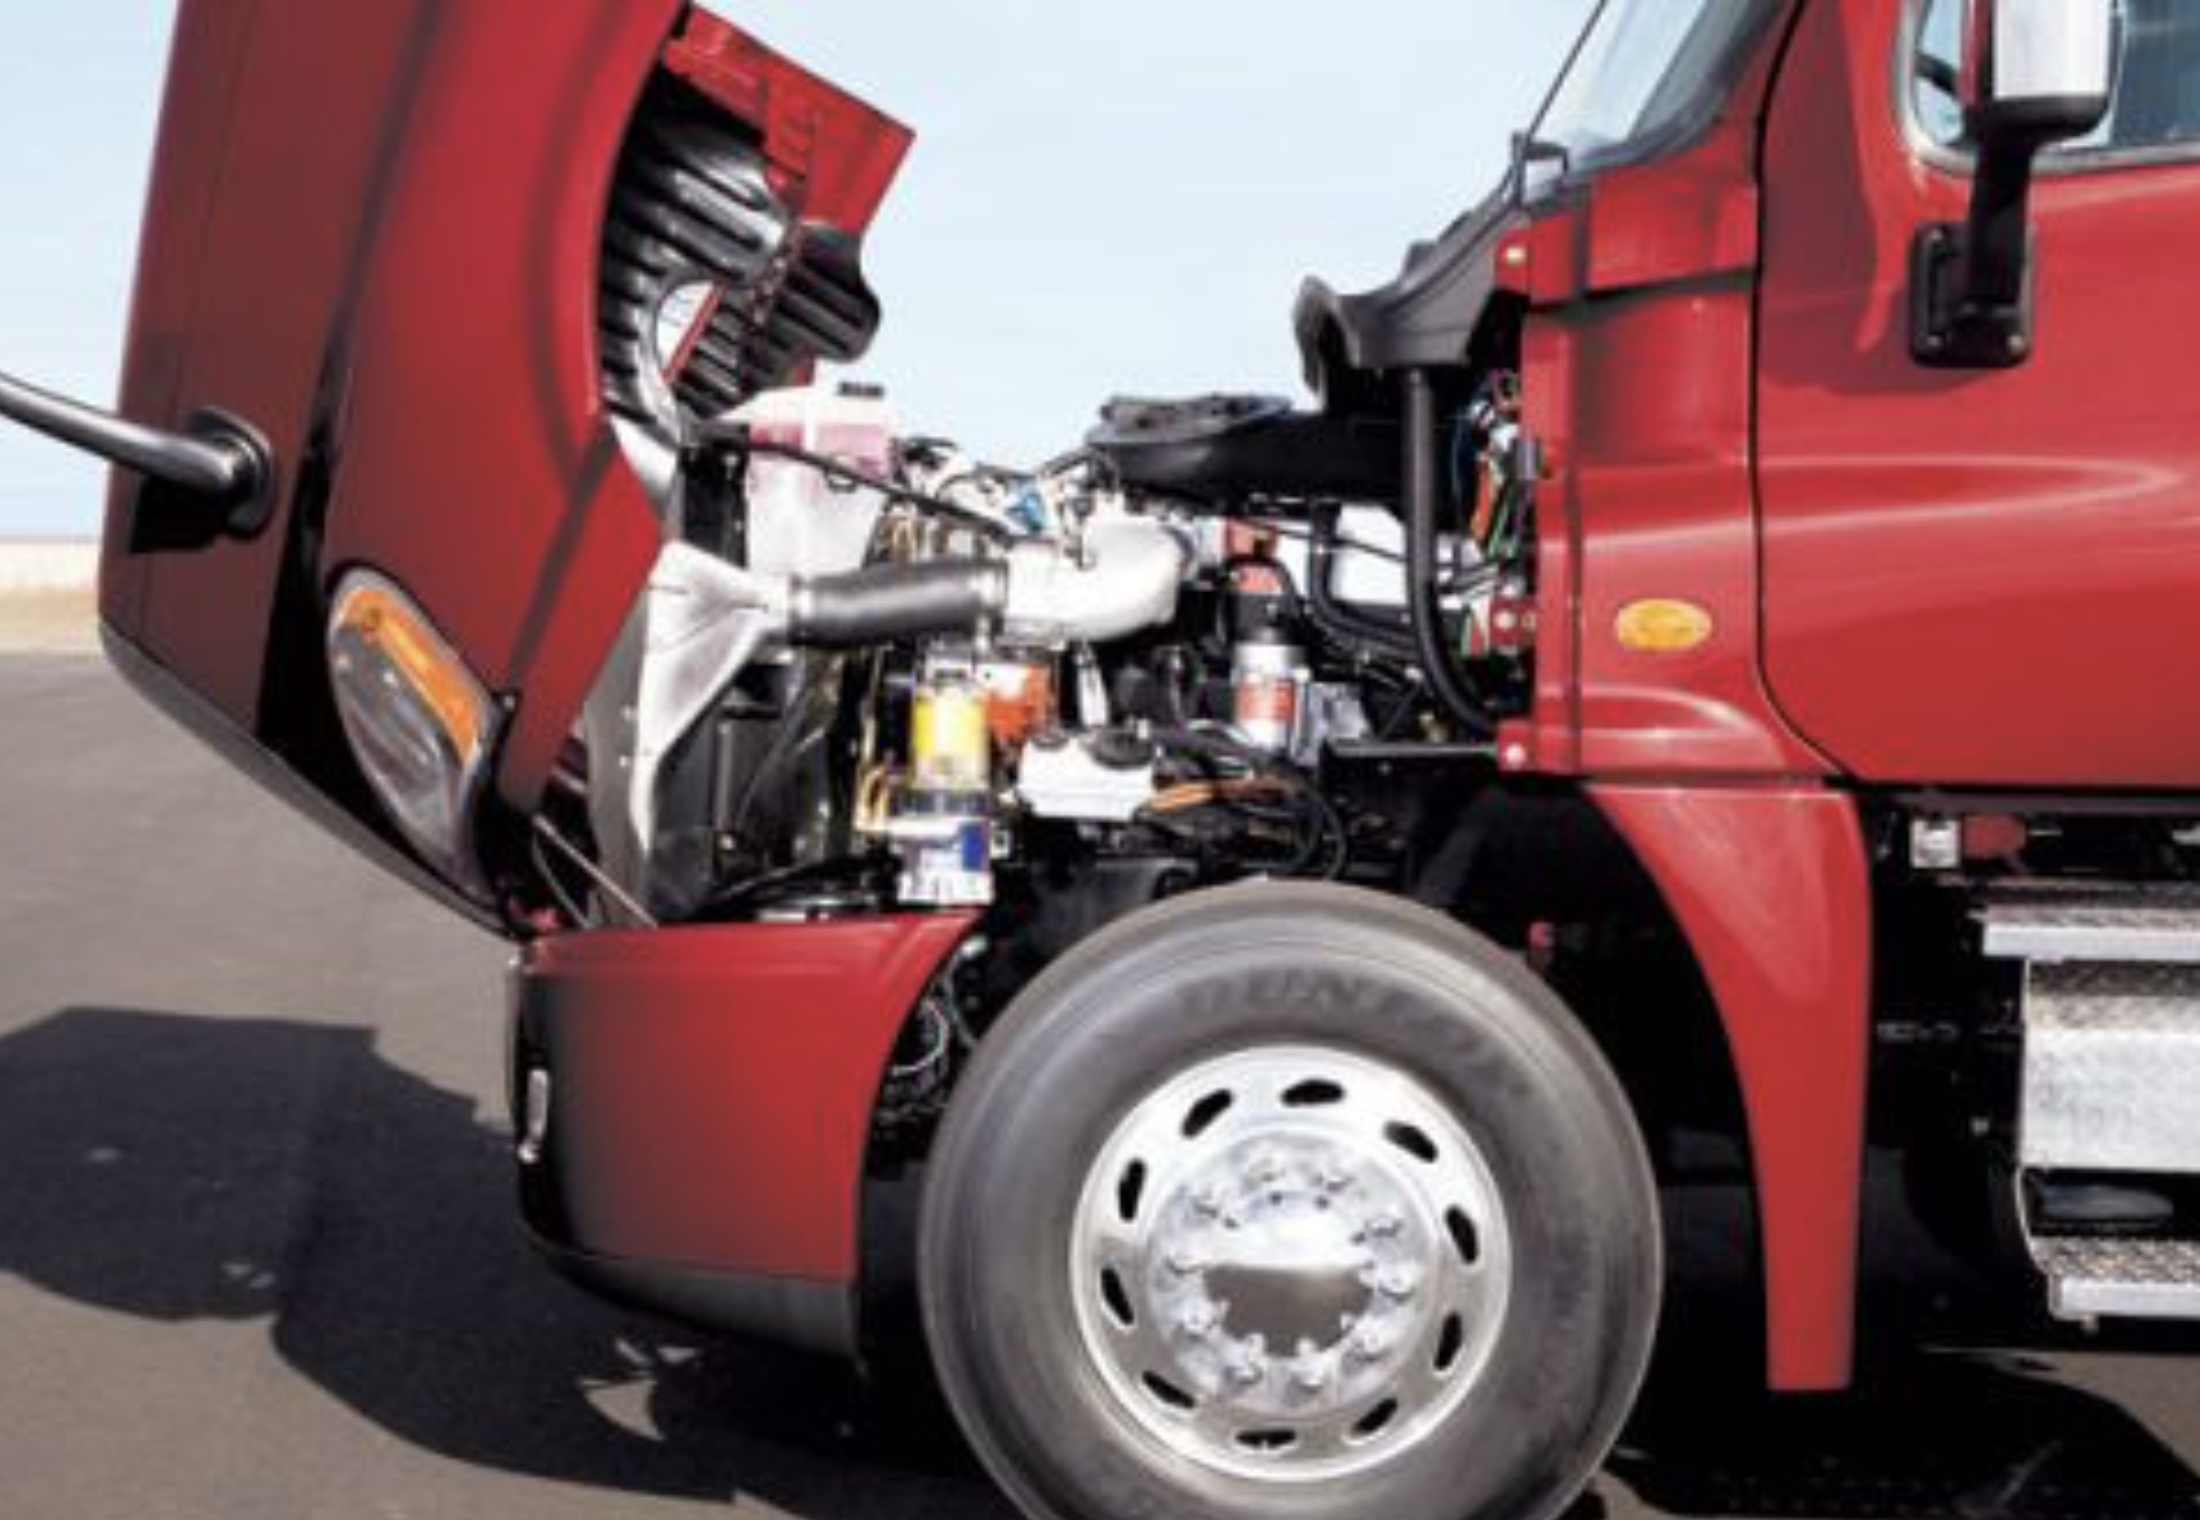 this image shows mobile truck repair service in Lancaster, California